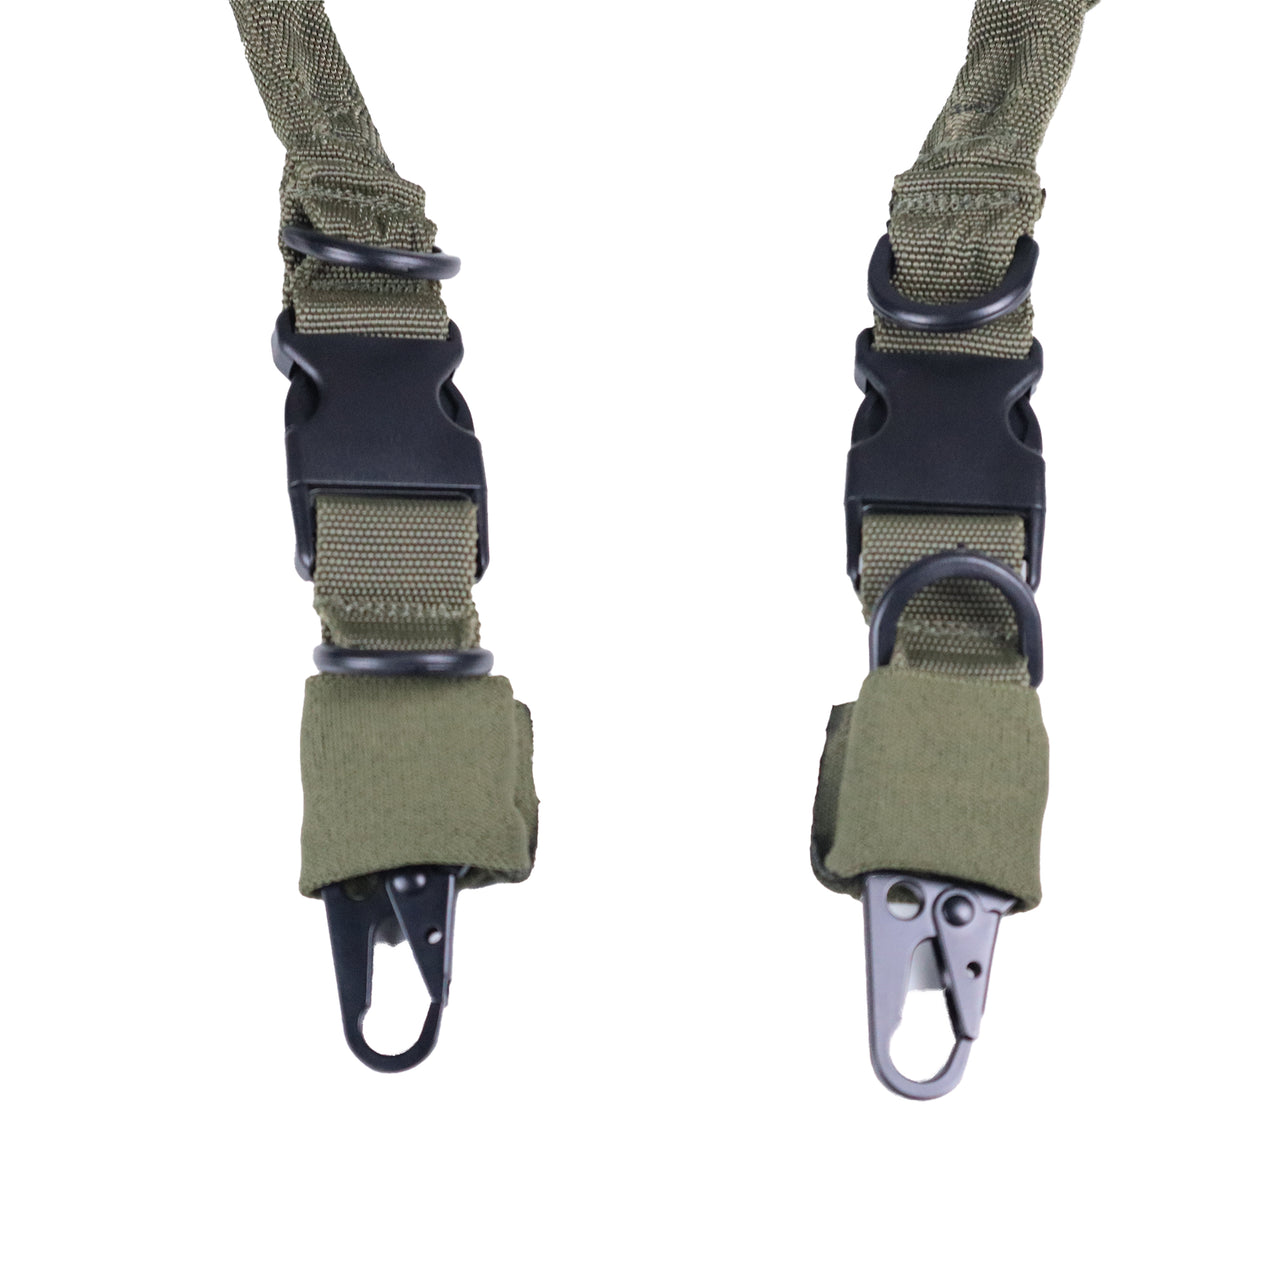 Heavy Duty Two Point Tactical Sling - Olive Green